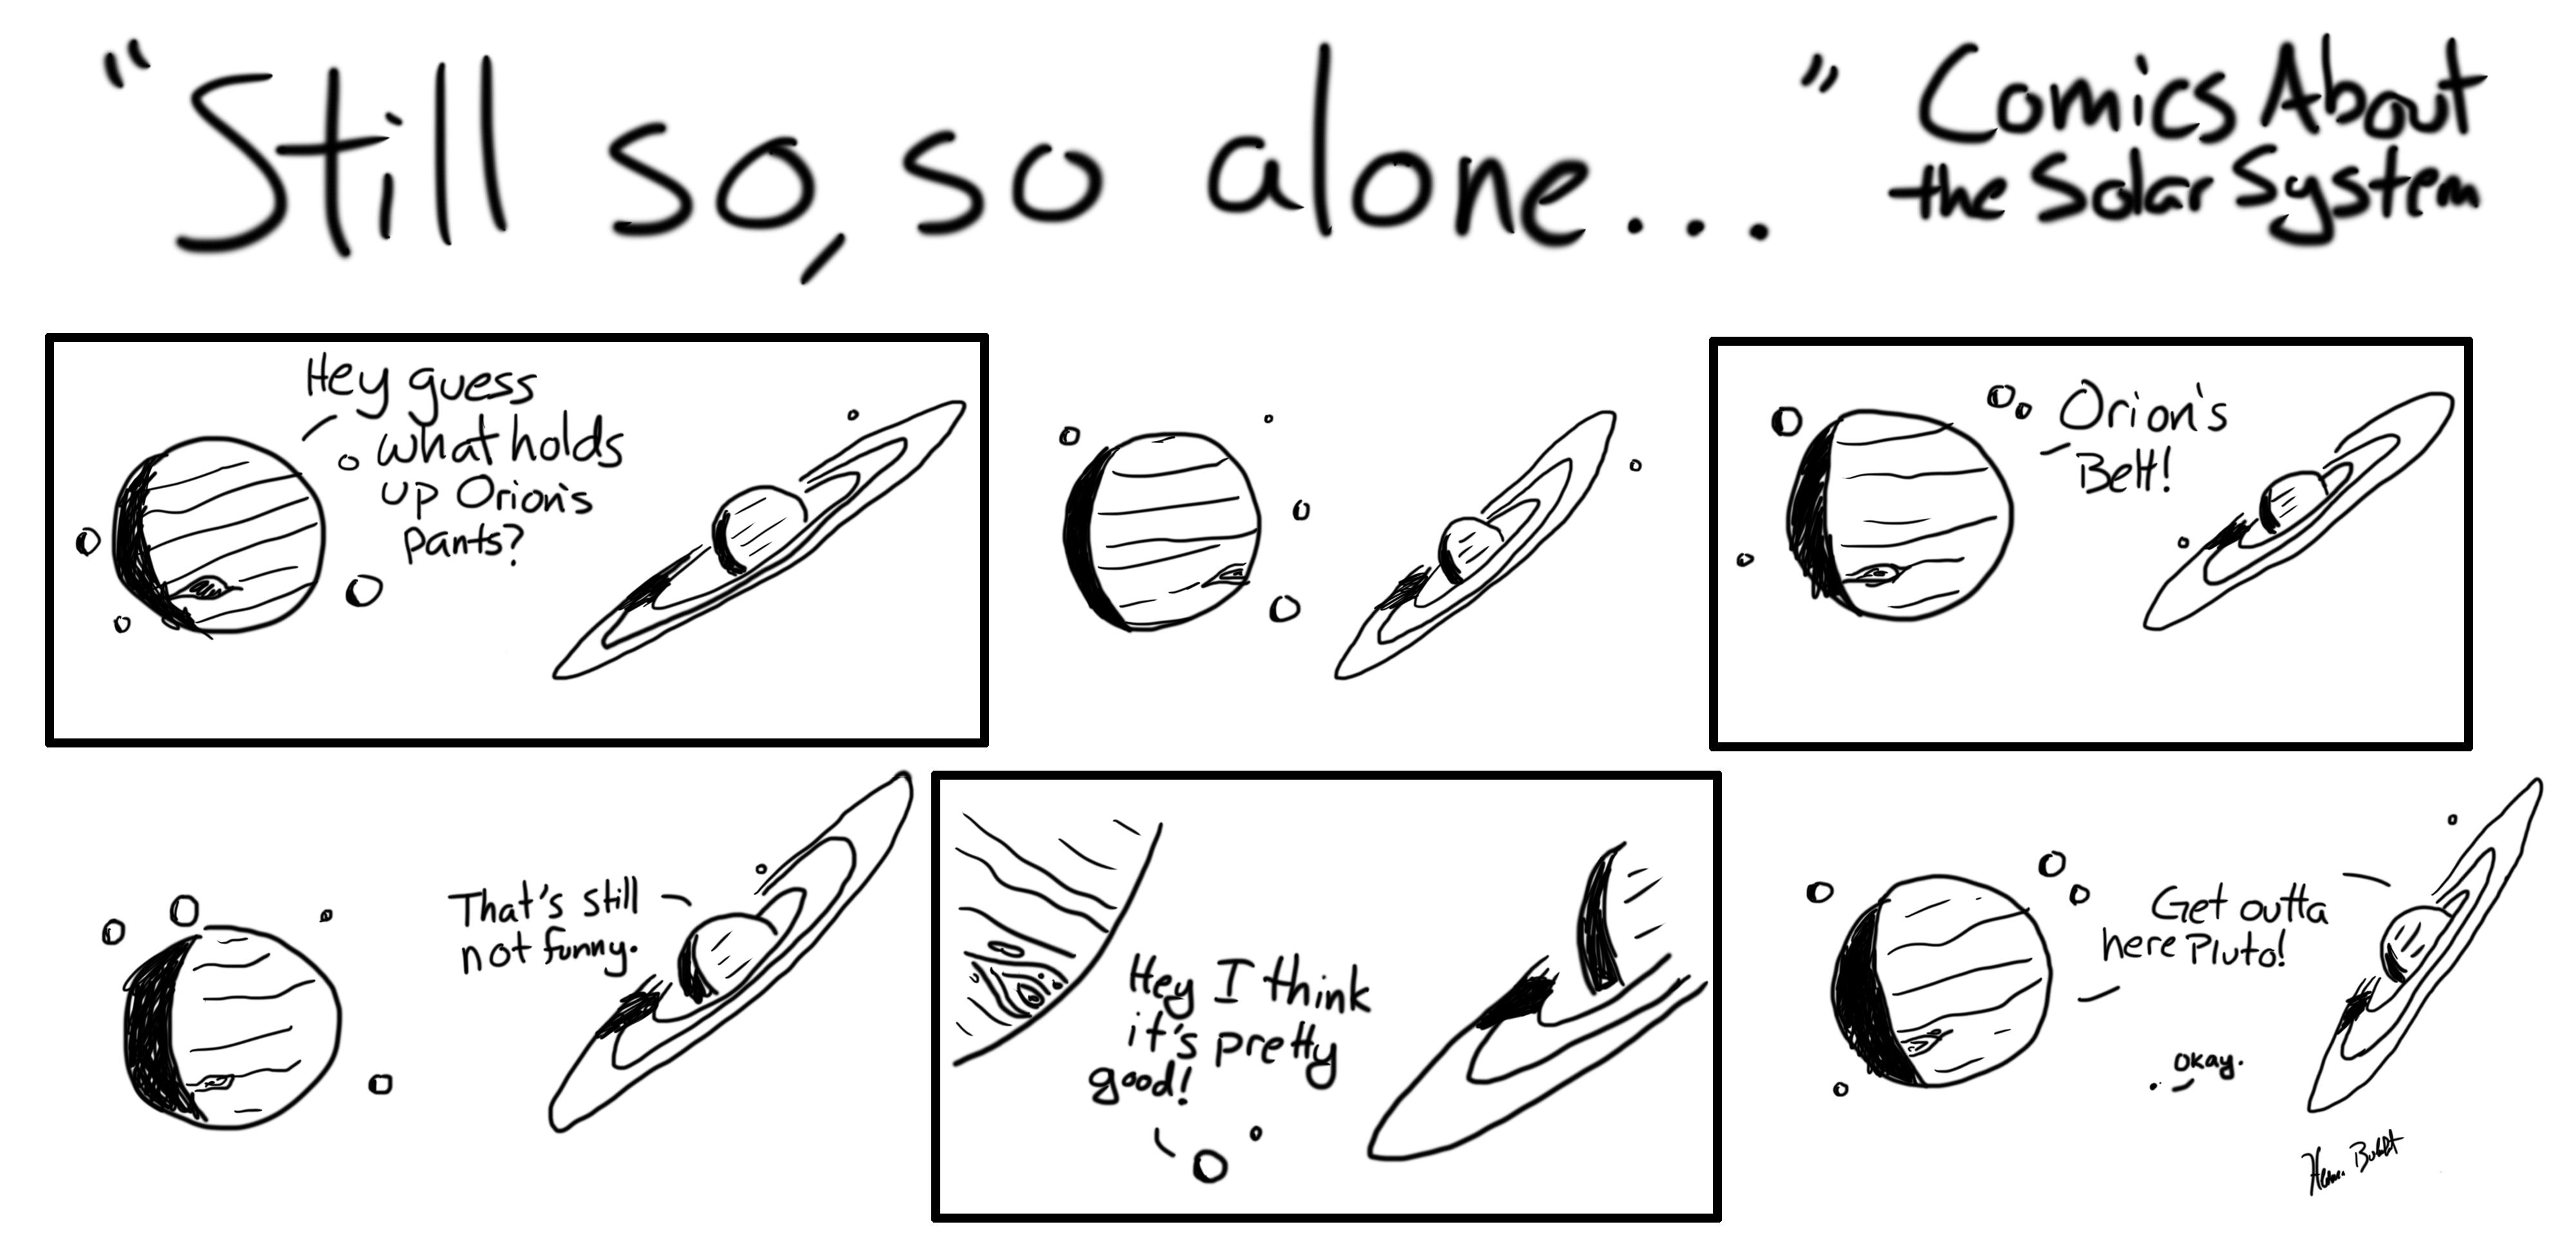 Comic strip entitled "Still so, so alone" and illustrating interactions between planets